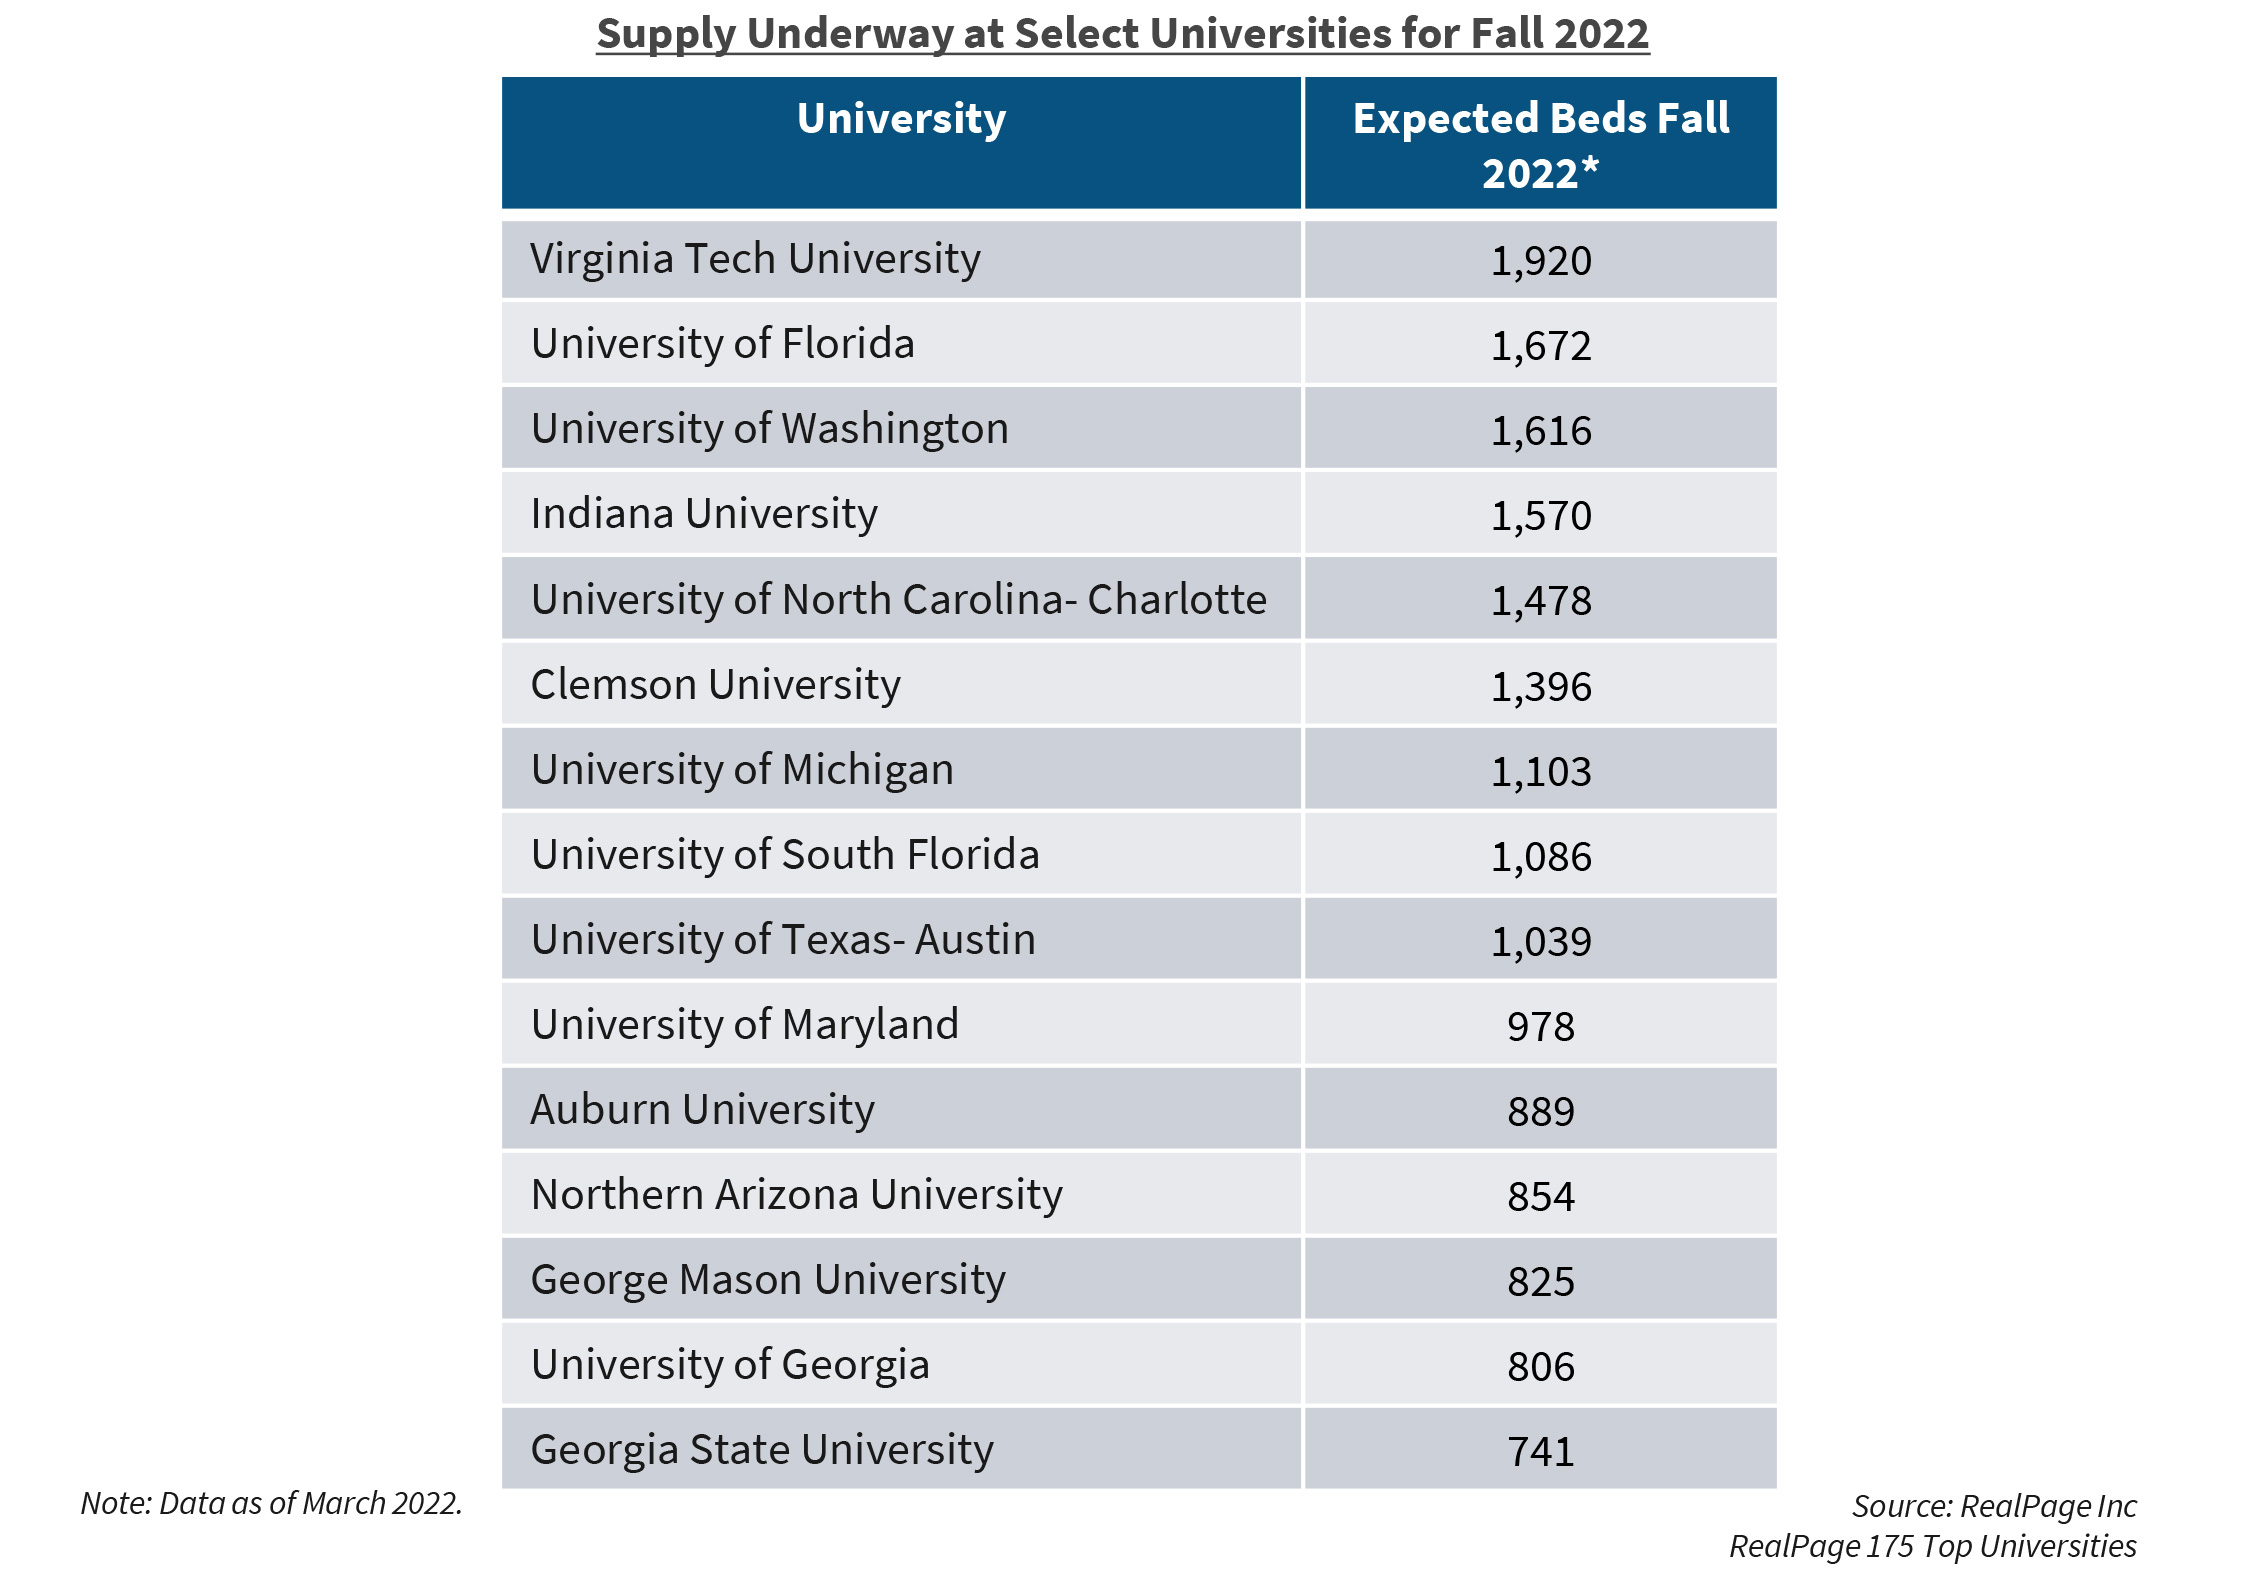 Supply Underway at Select Universities for Fall 2022